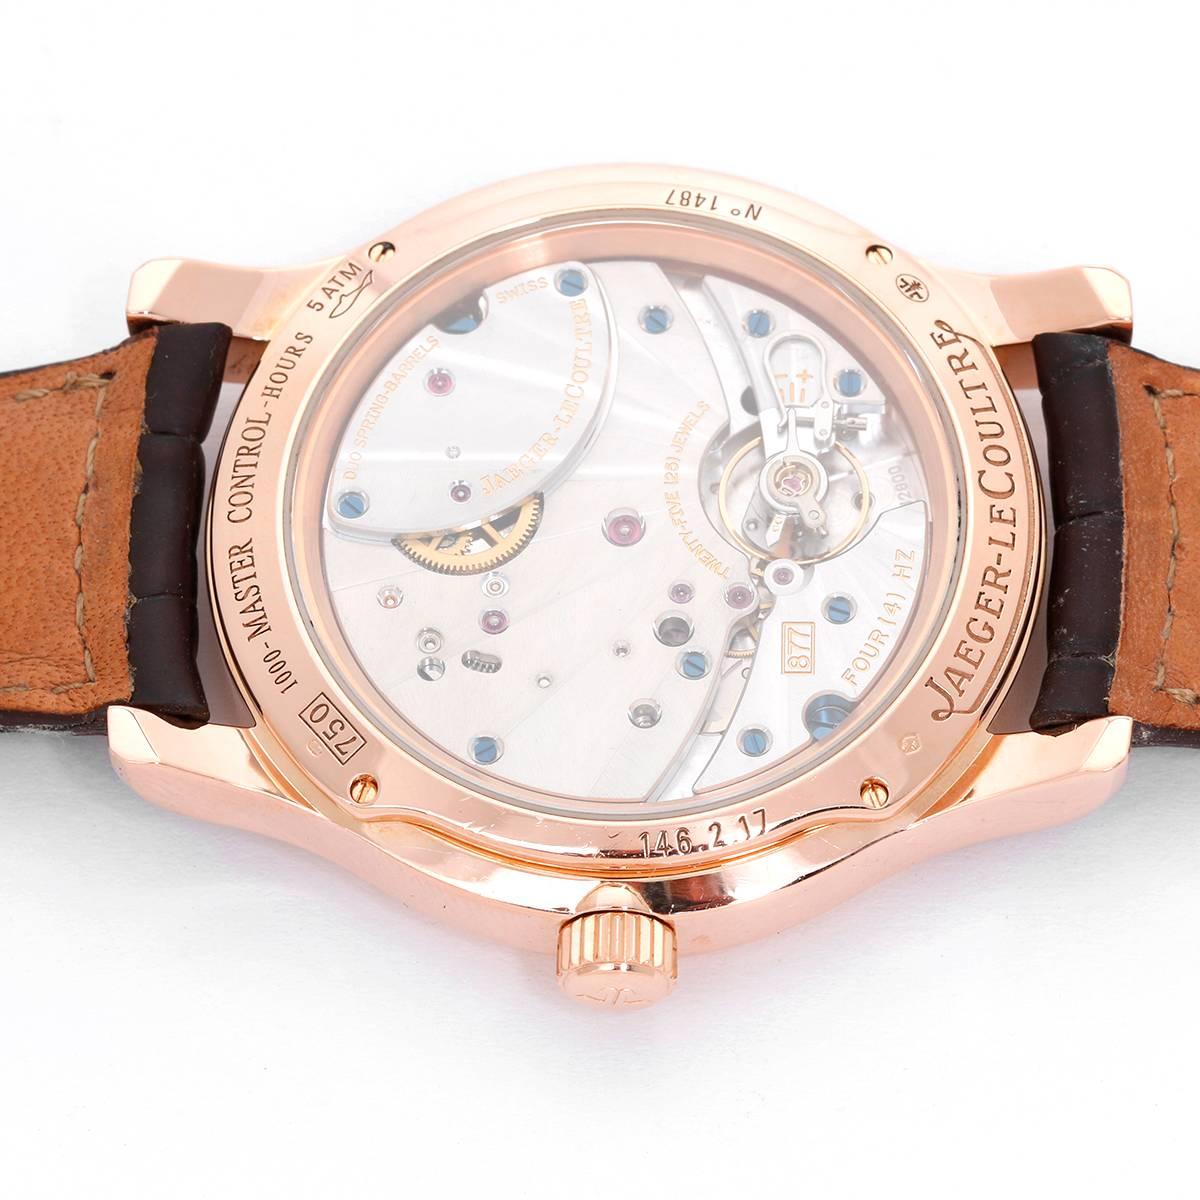 Jaeger-LeCoultre Master Eight Days Rose Gold Men's Watch Q1602420 -  Automatic winding, Date, Day/Night Indicator, Power Reserve Indicator. Rose gold case (42mm diameter). Silver dial with arrow shaped markers. Strap band with rose gold deployant